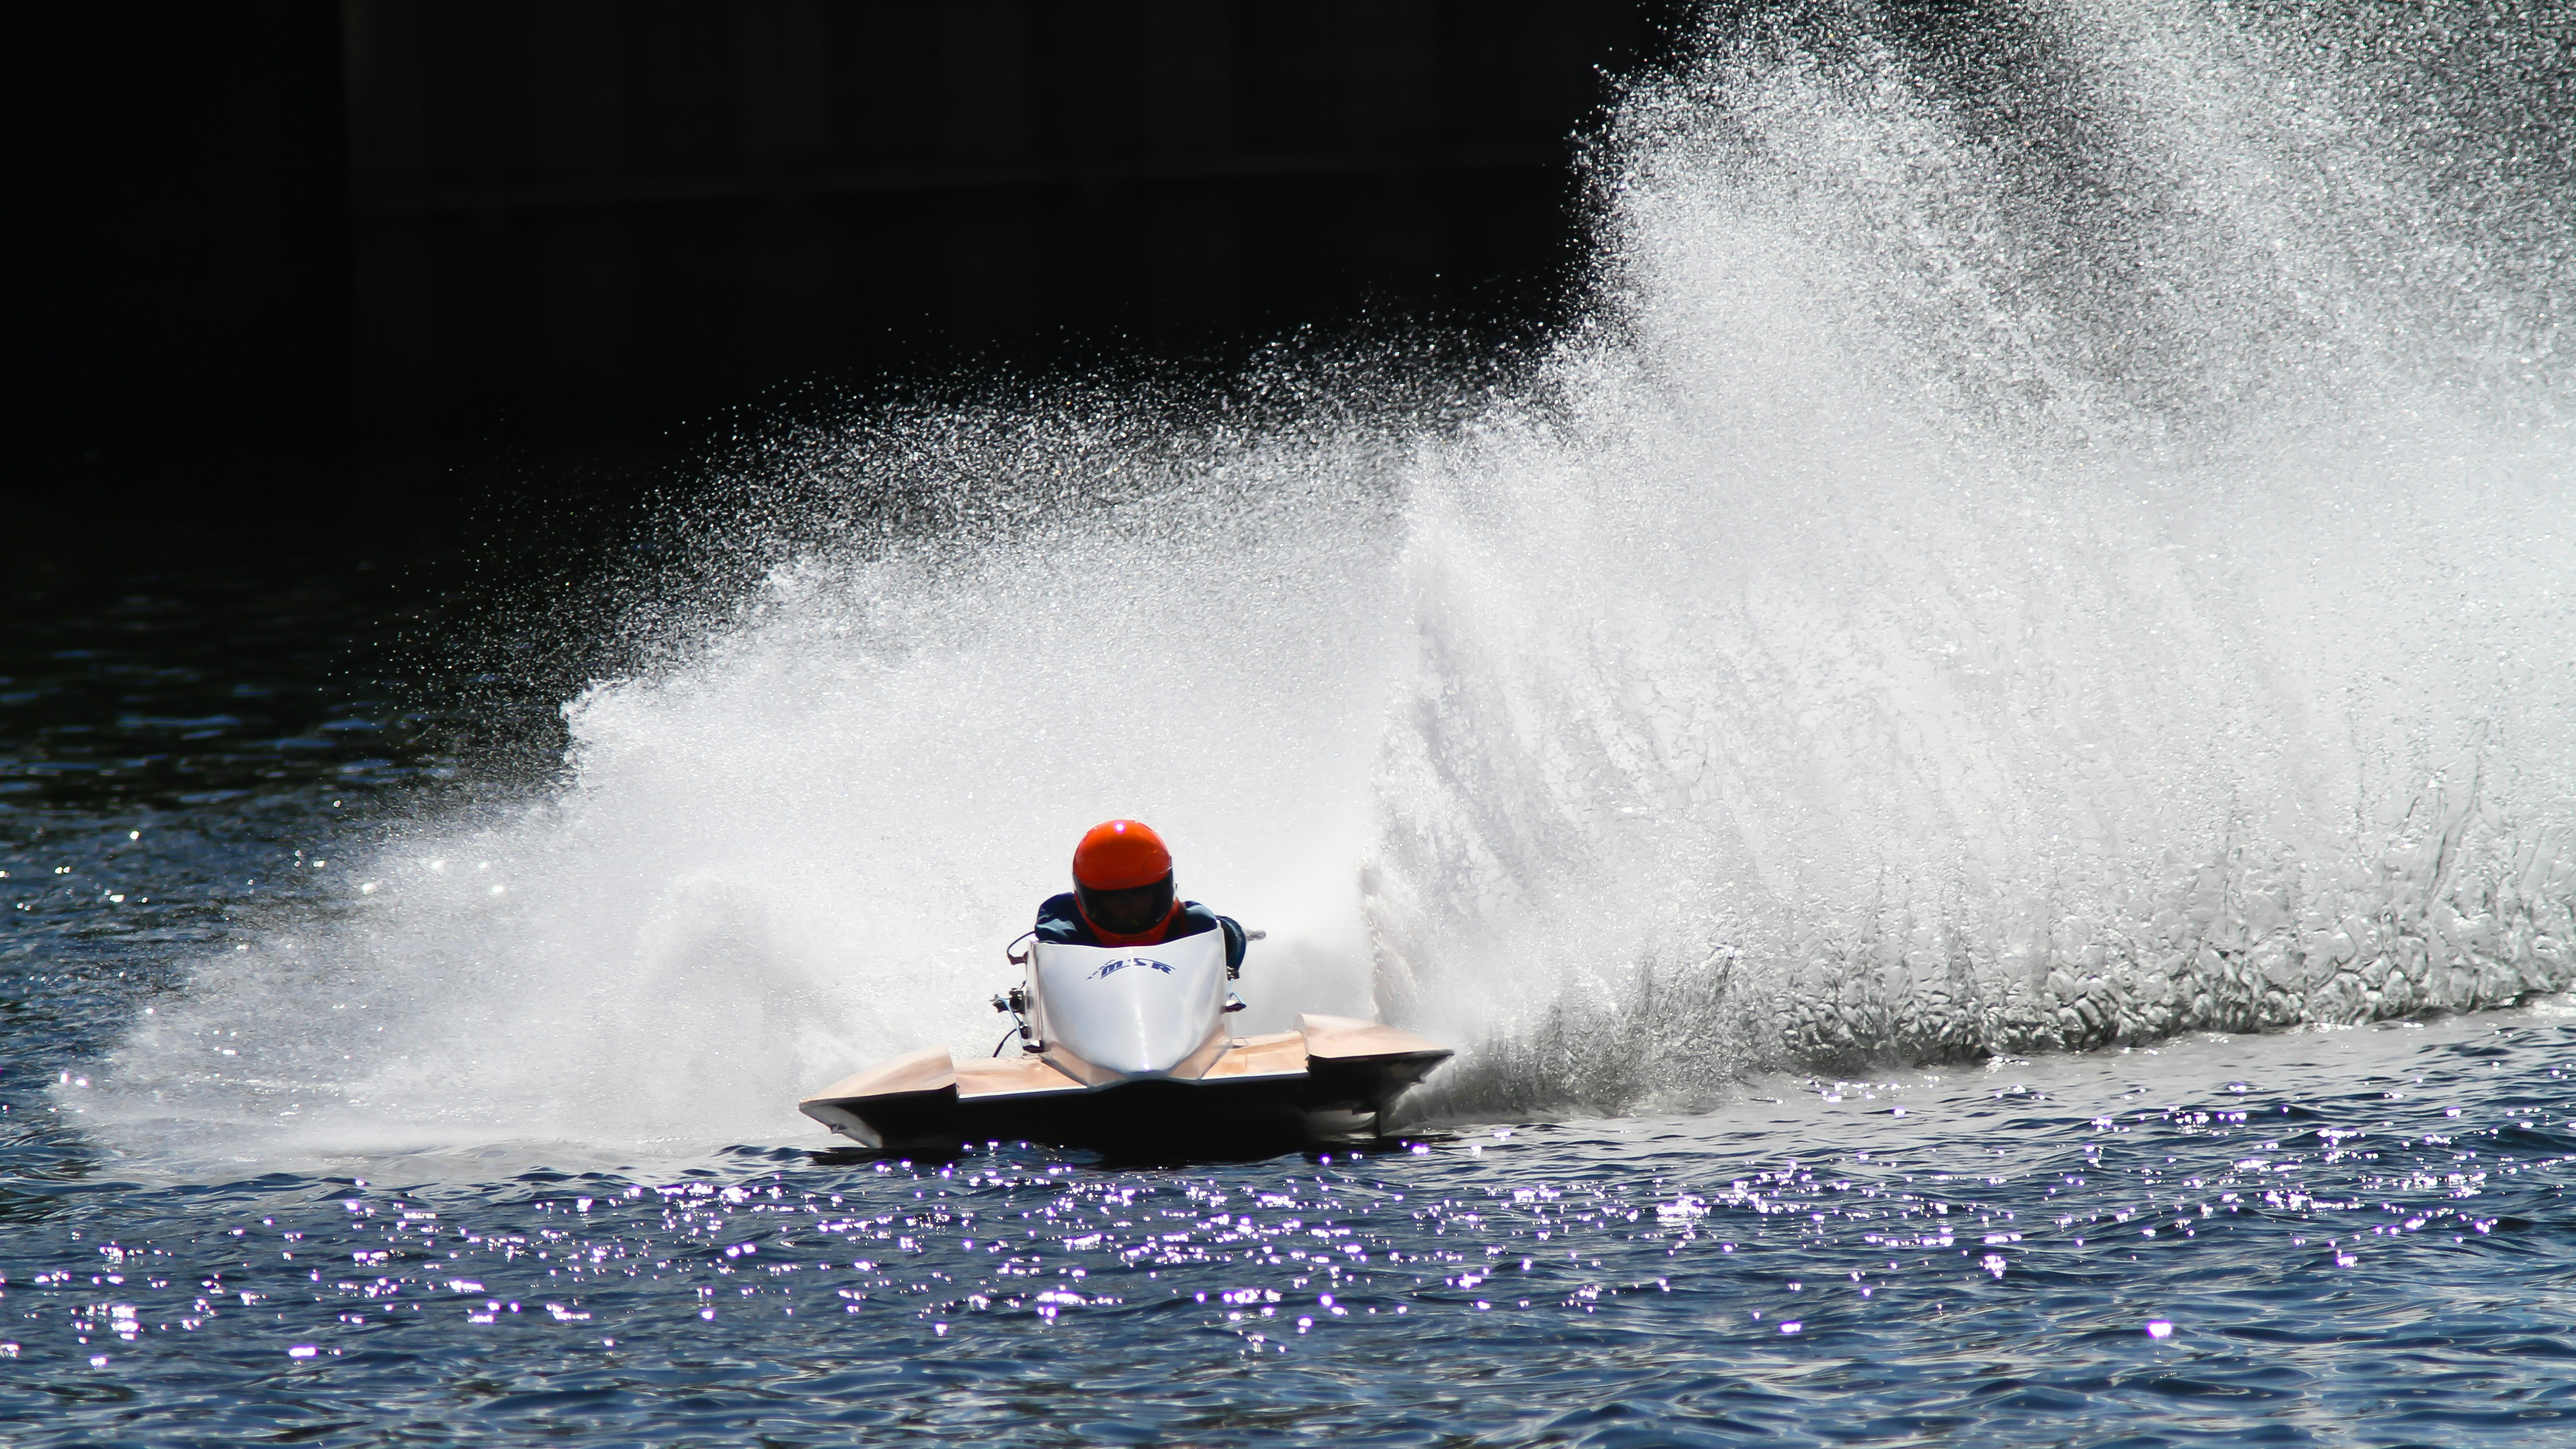 Speedboat race on the Connecticut River